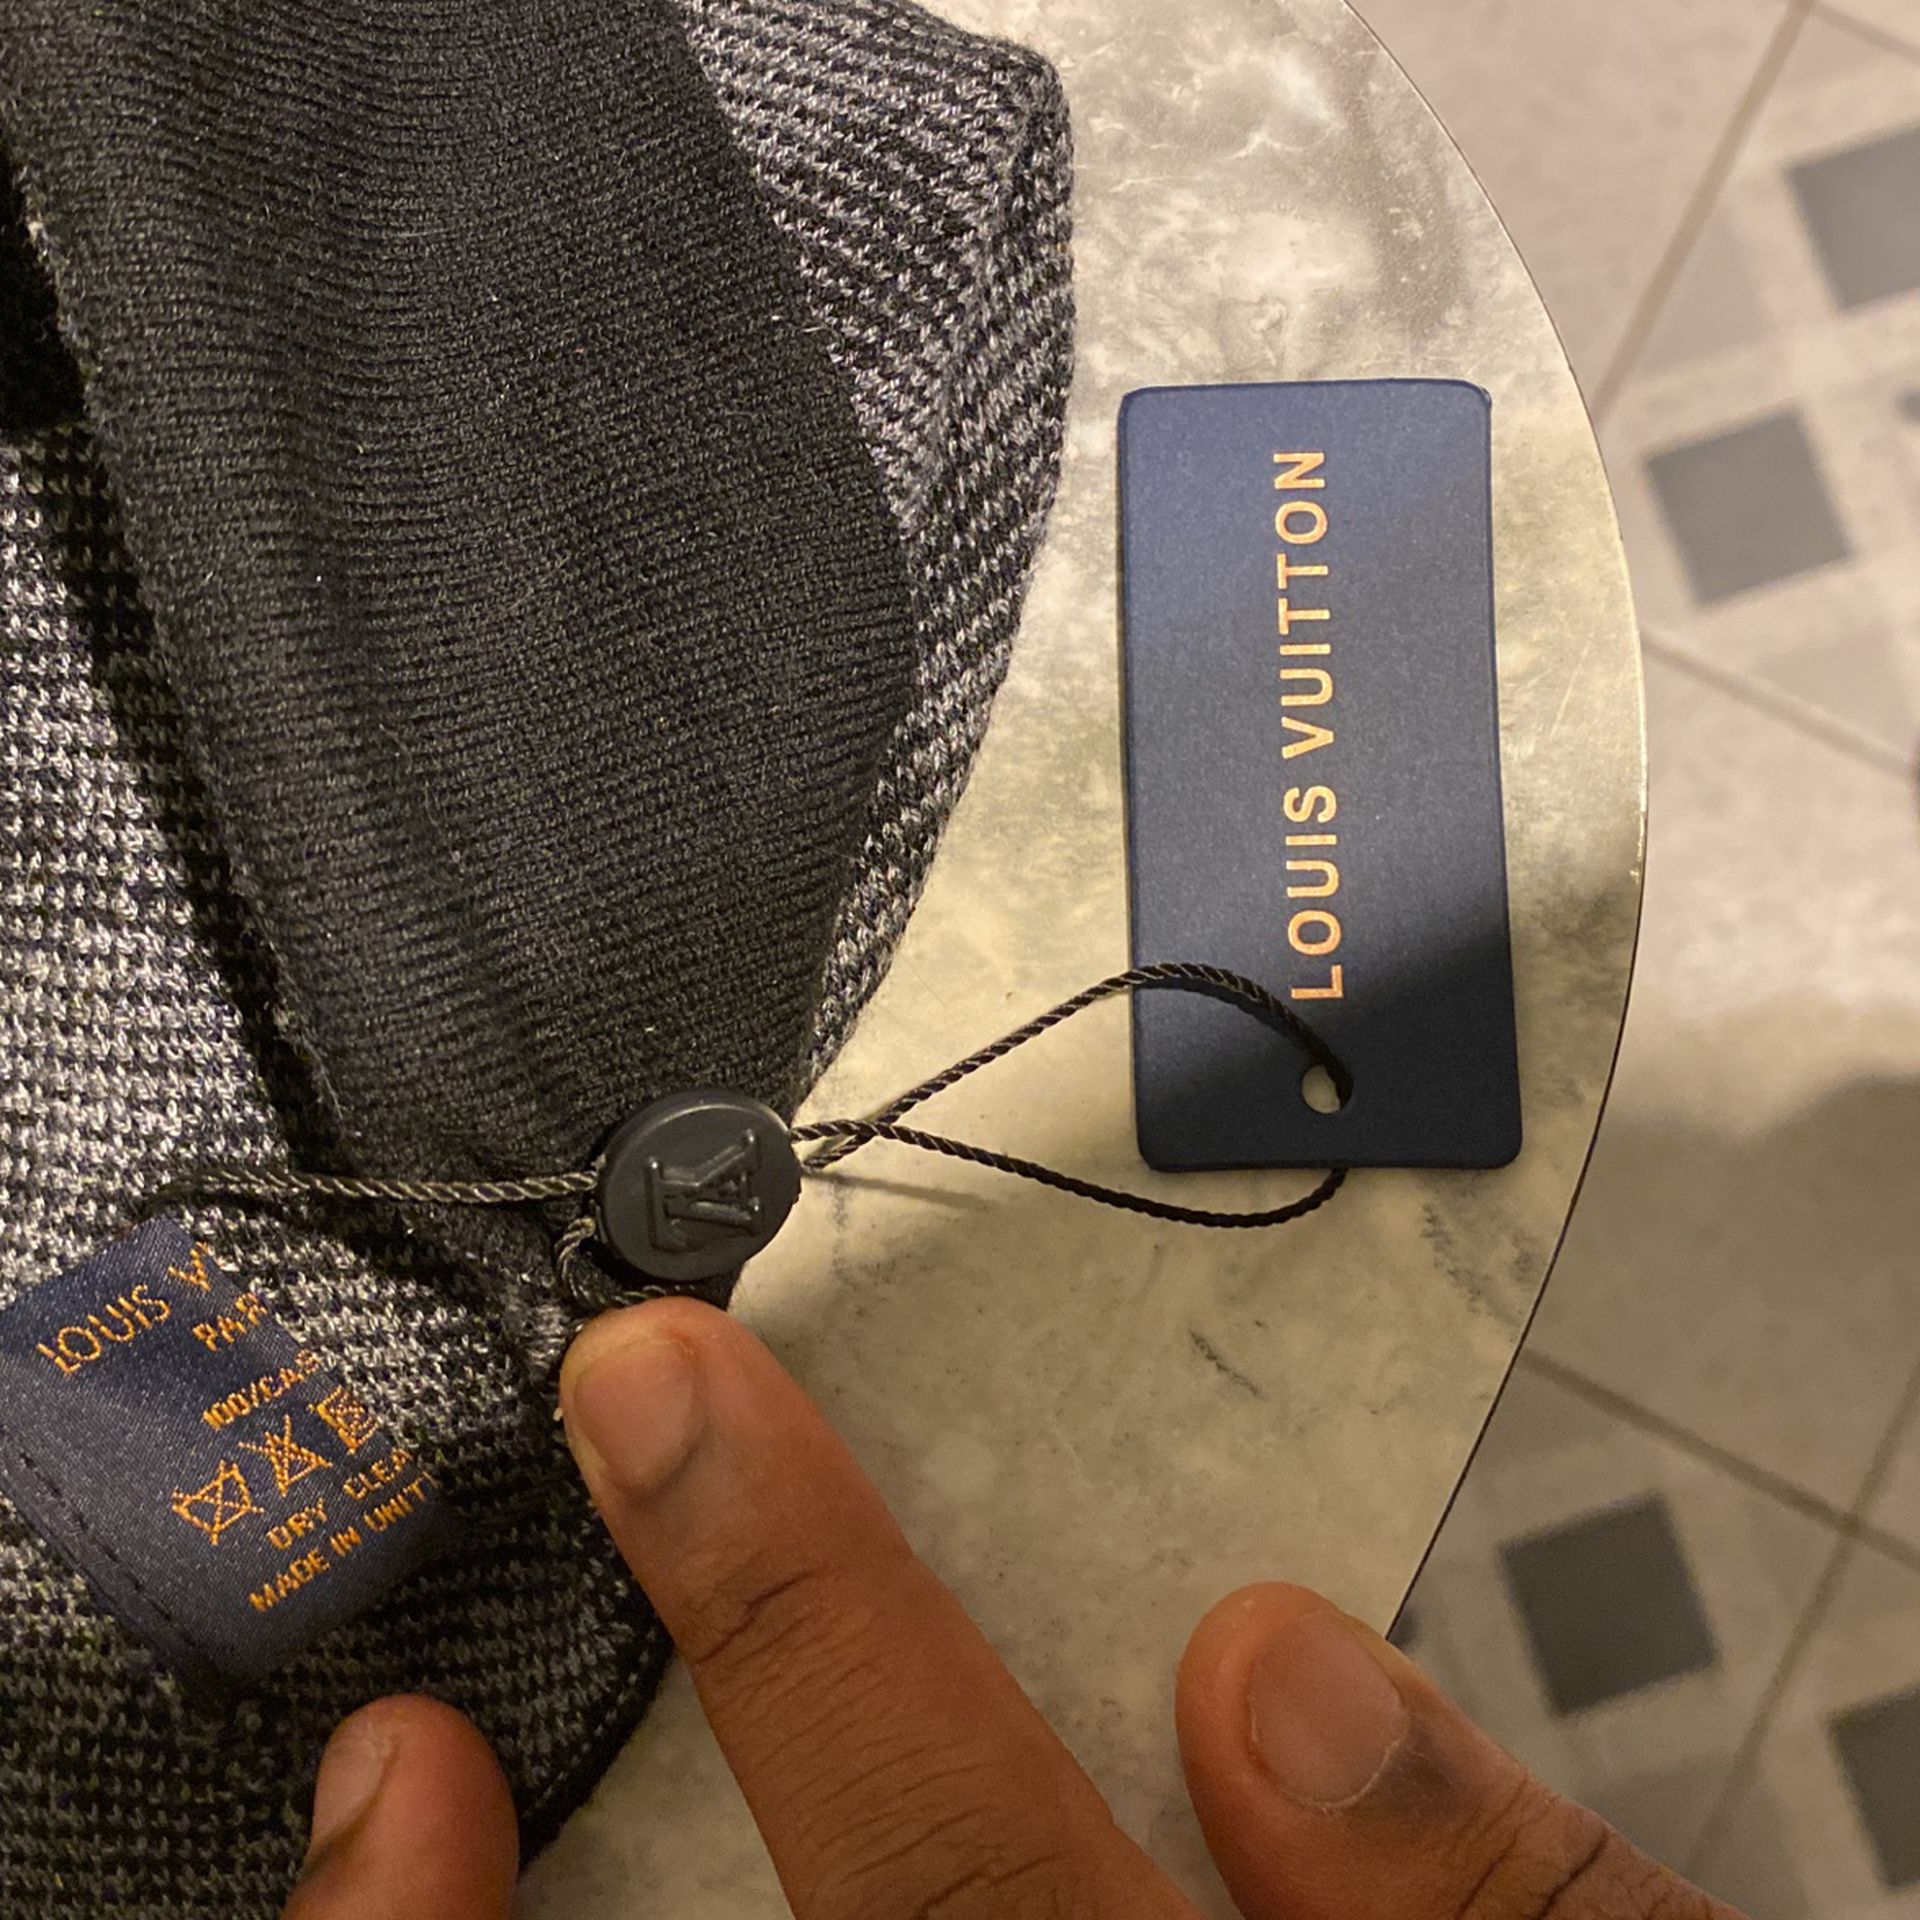 LV Beanie Grey Shipping Only for Sale in New Britain, CT - OfferUp